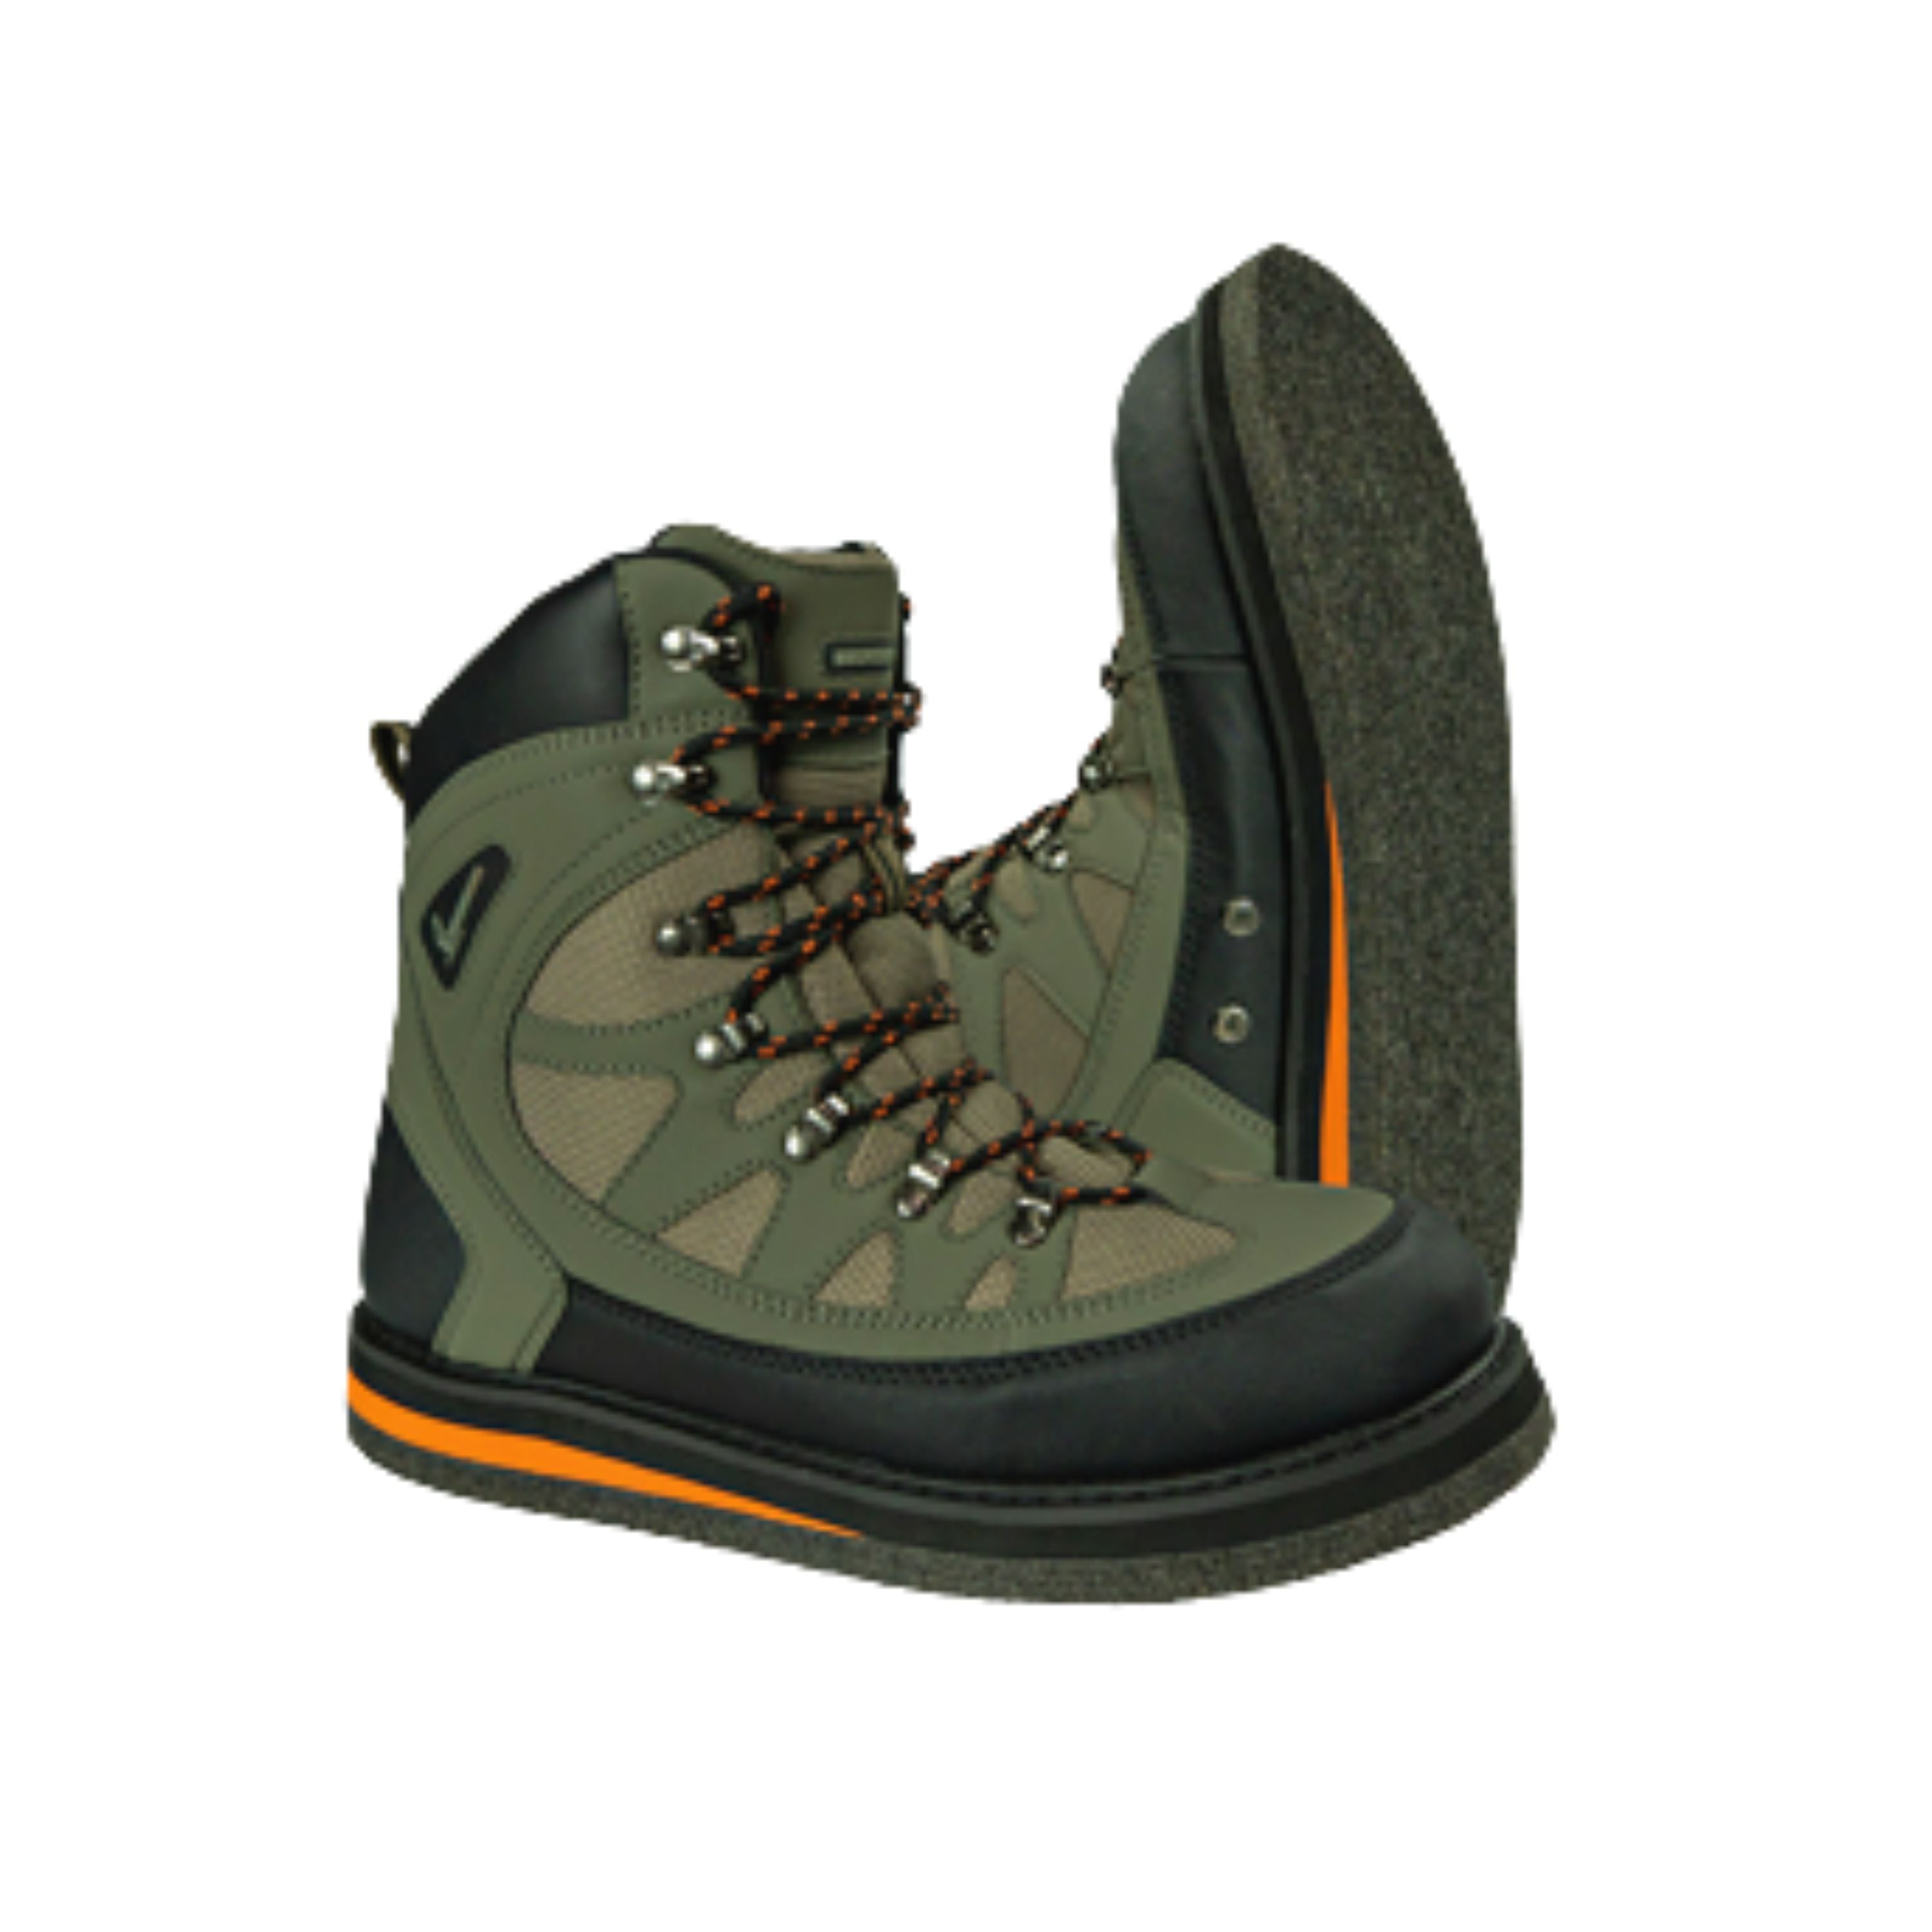 Simms Rip-Rap Wading Shoe for Year-Round Fishing – My Only Choice - TRR  Outfitters